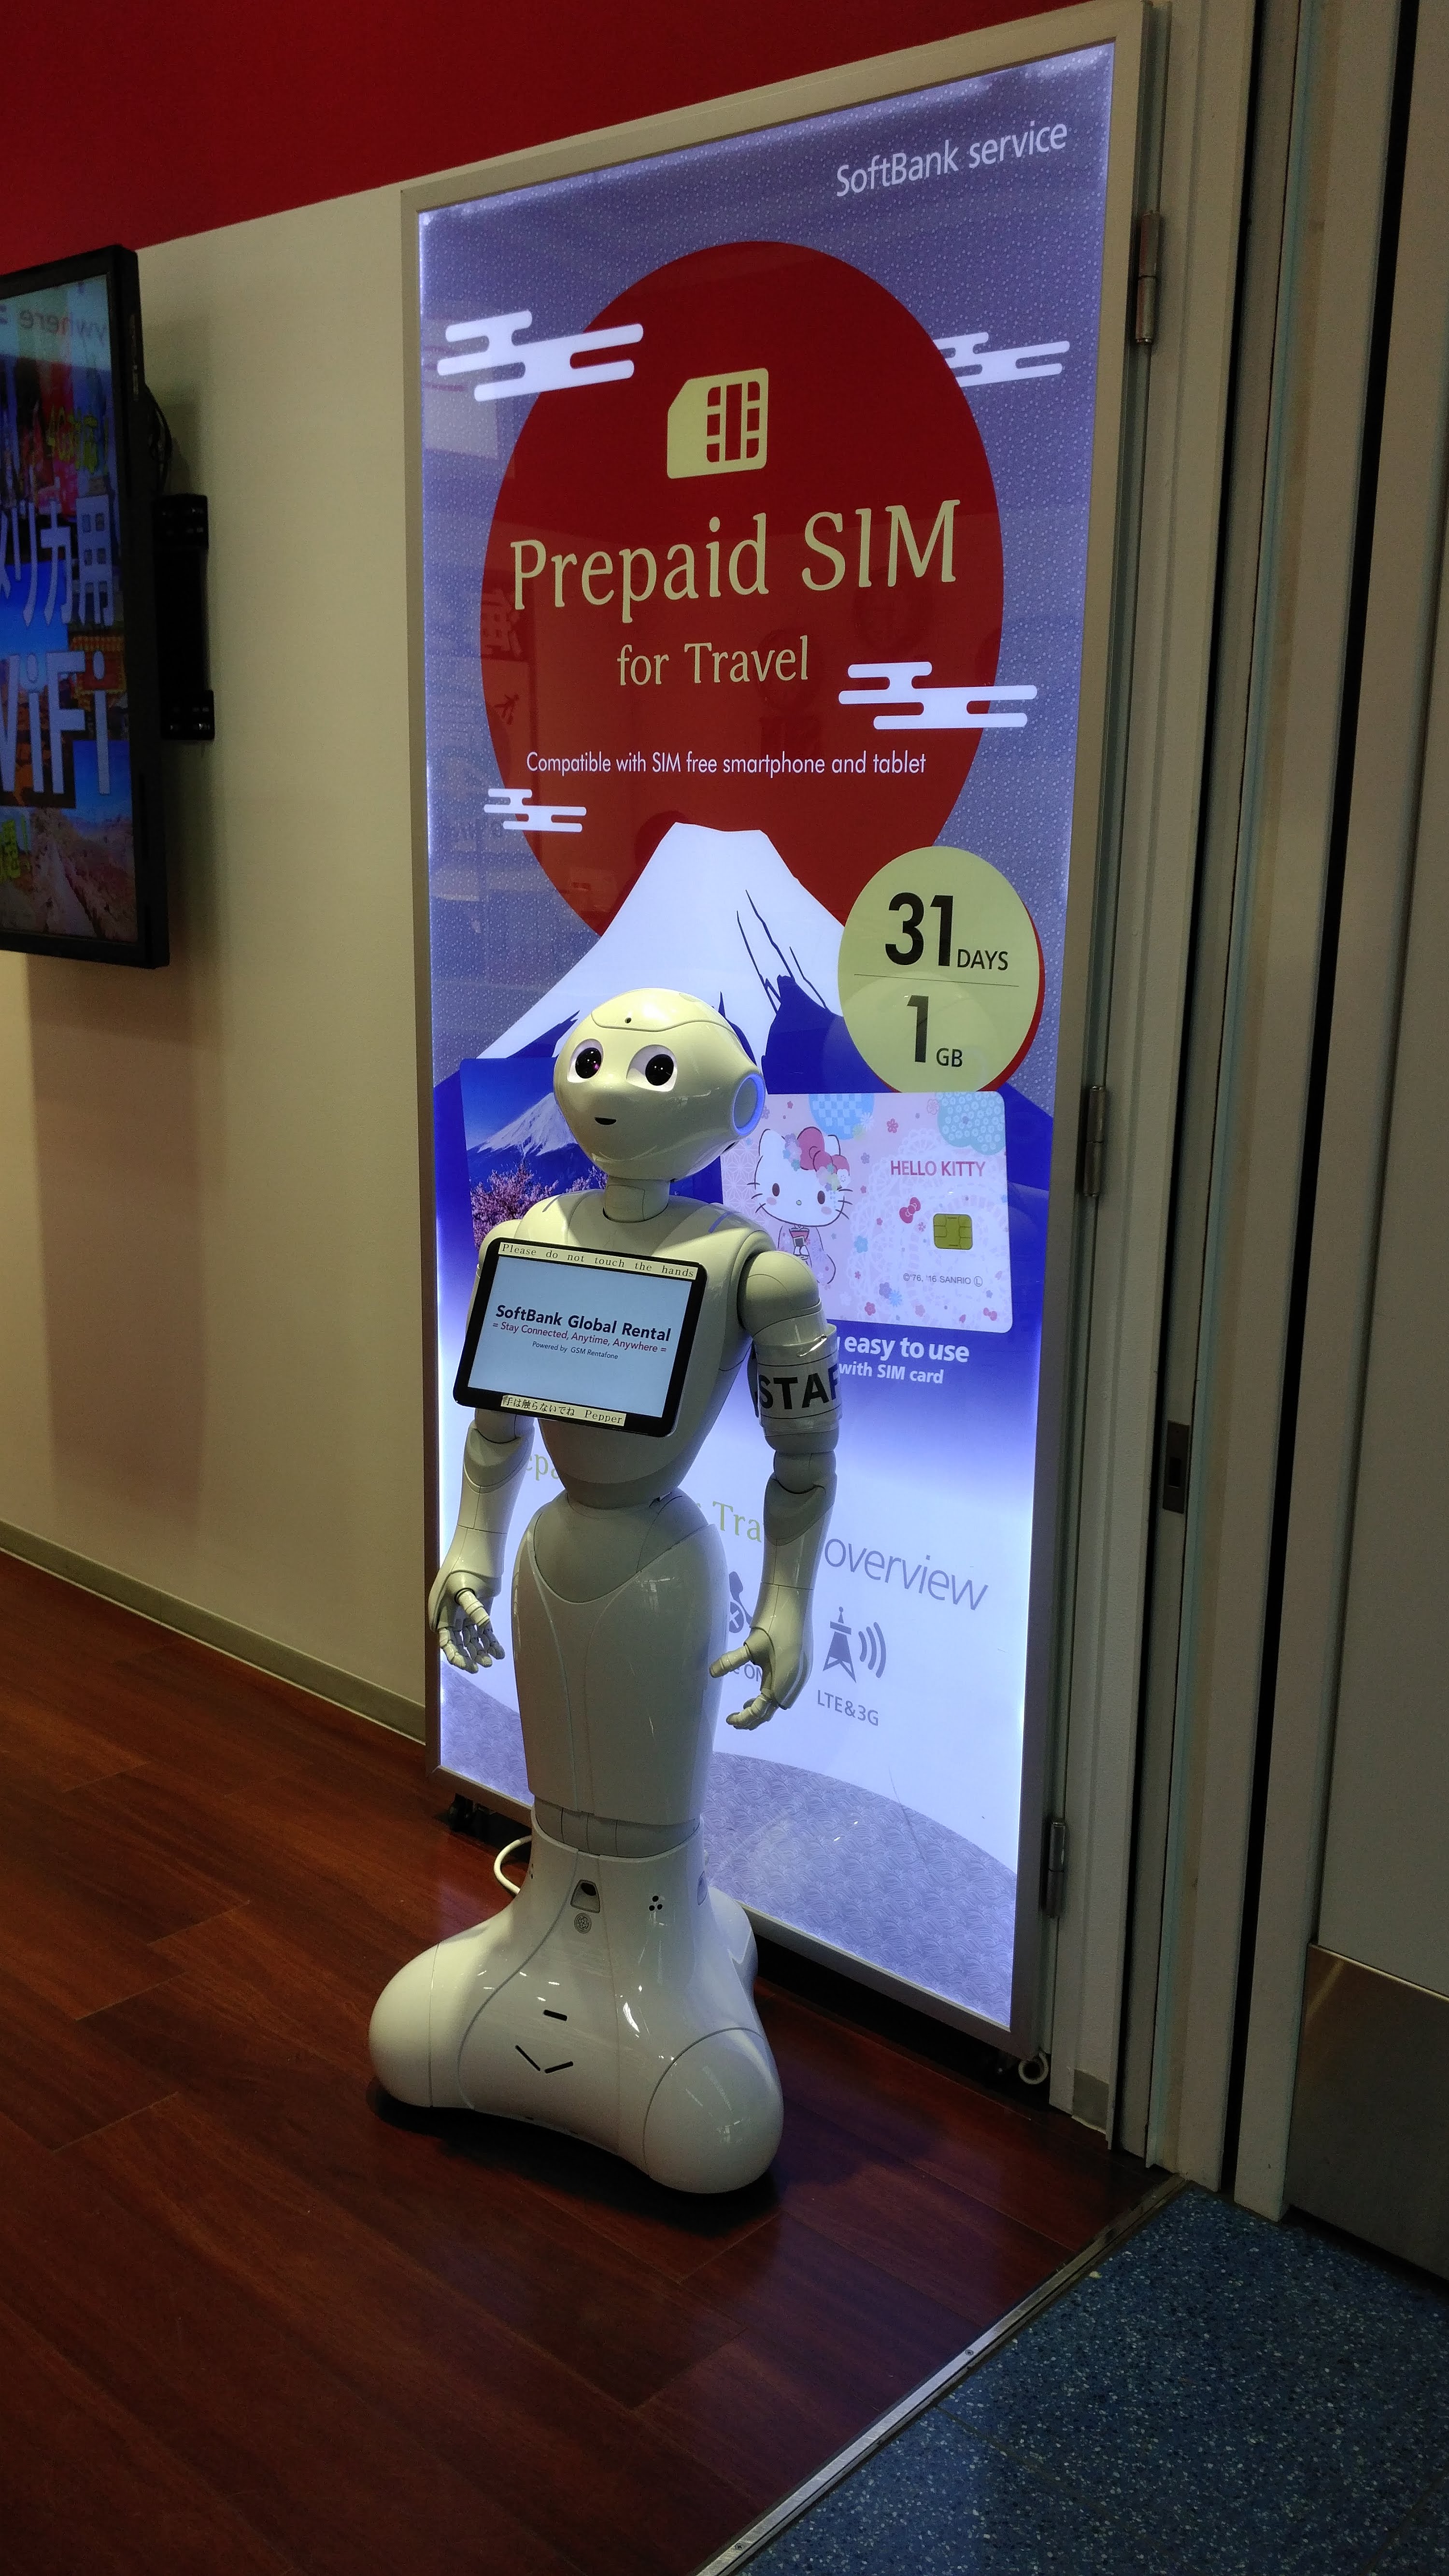 a pepper robot promoting sim cards